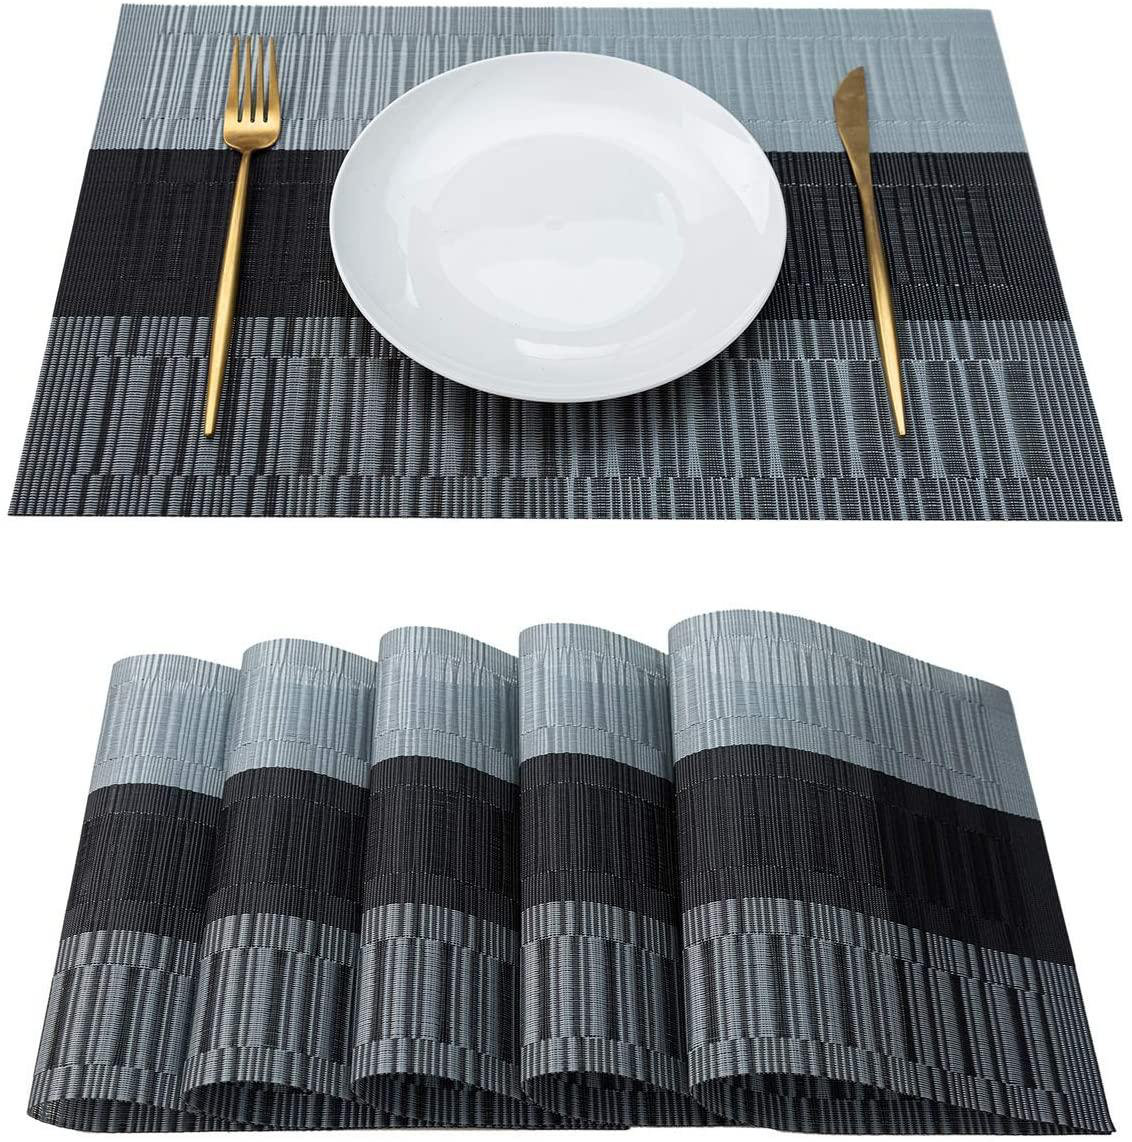 Placemats for Dining Table Washable Placemat Set of 4 Heat Resistant Woven Vinyl